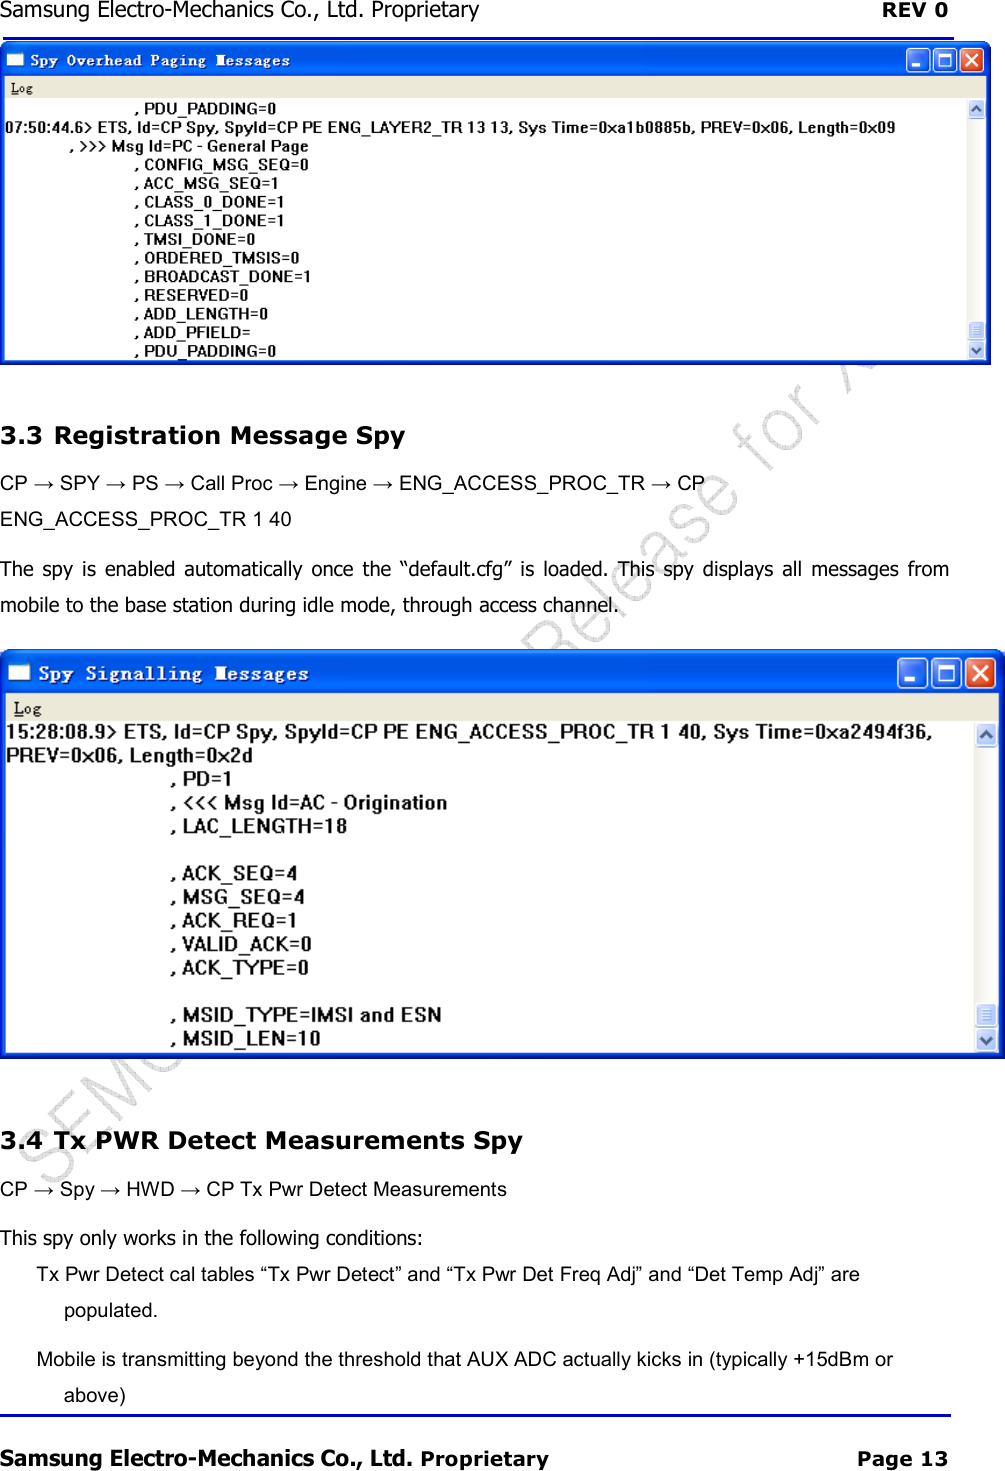 Samsung Electro-Mechanics Co., Ltd. Proprietary  REV 0 Samsung Electro-Mechanics Co., Ltd. Proprietary  Page 13  3.3  Registration Message Spy CP → SPY → PS → Call Proc → Engine → ENG_ACCESS_PROC_TR → CP ENG_ACCESS_PROC_TR 1 40 The  spy  is enabled  automatically  once the  “default.cfg” is  loaded.  This  spy  displays all  messages  from mobile to the base station during idle mode, through access channel.   3.4  Tx PWR Detect Measurements Spy CP → Spy → HWD → CP Tx Pwr Detect Measurements This spy only works in the following conditions: Tx Pwr Detect cal tables “Tx Pwr Detect” and “Tx Pwr Det Freq Adj” and “Det Temp Adj” are populated. Mobile is transmitting beyond the threshold that AUX ADC actually kicks in (typically +15dBm or above) 